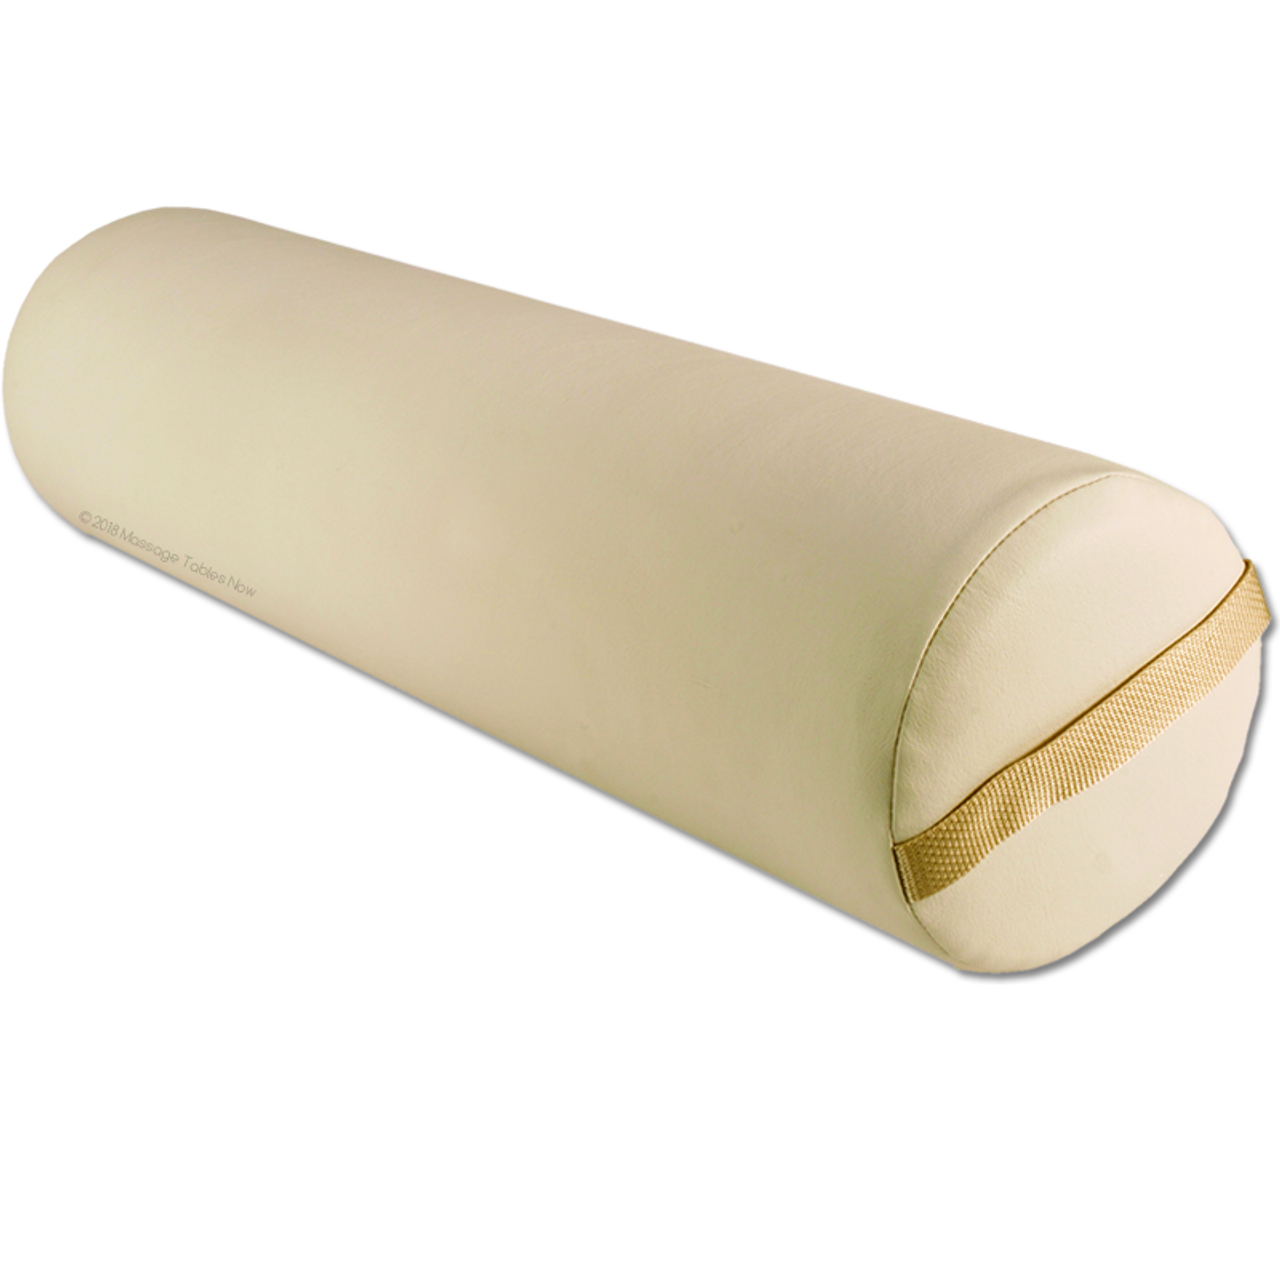 Buy Round Bolster Pillow for Massage Tables